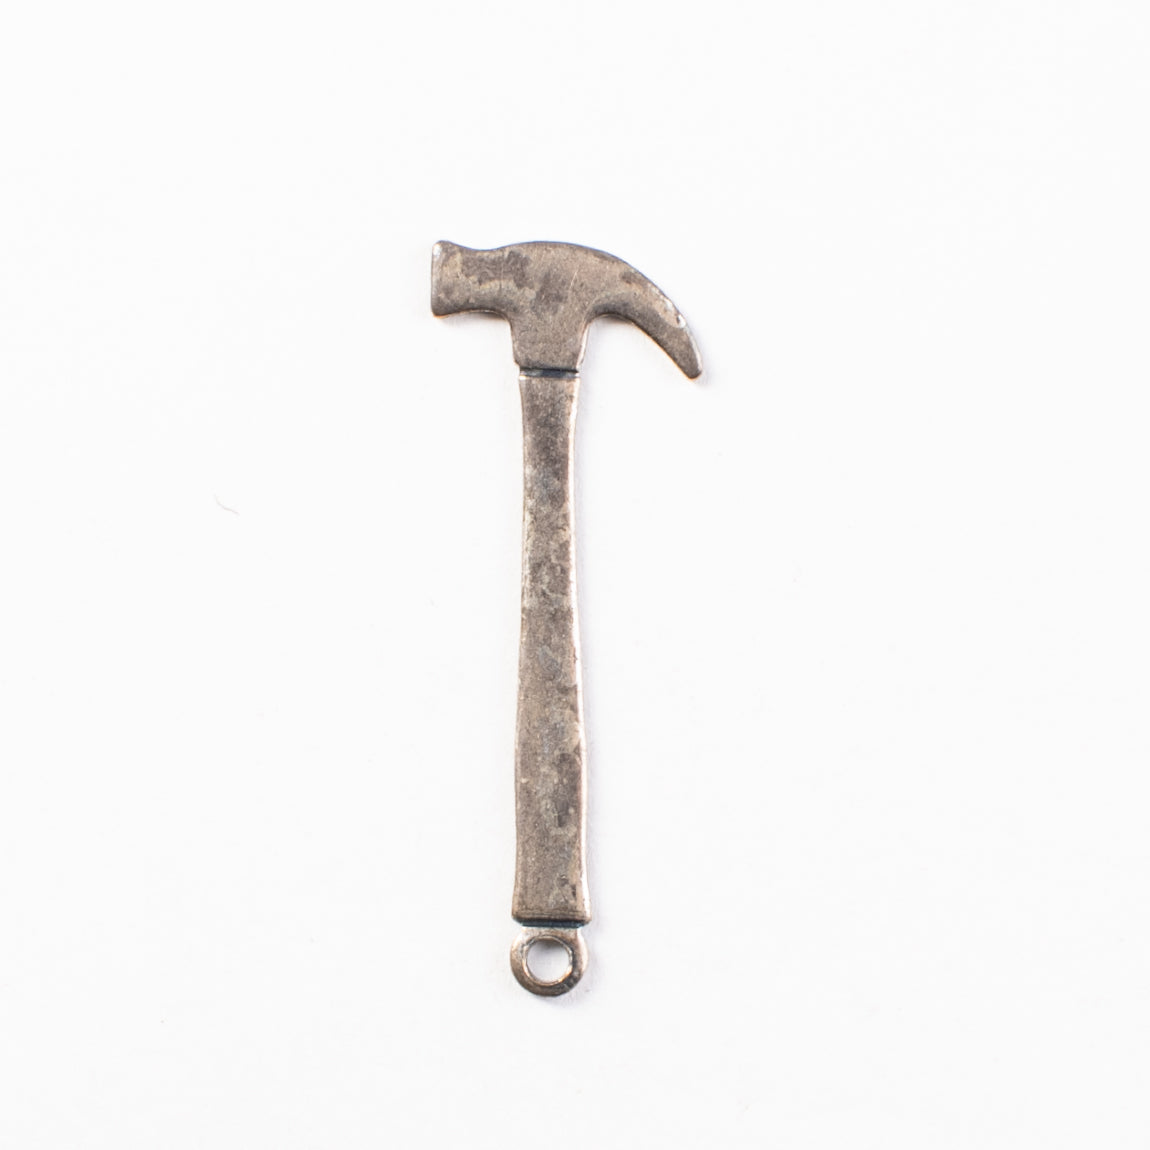 35mm Hammer Tools Charm, Antique Gold, Classic Silver, made in USA, pack of 6